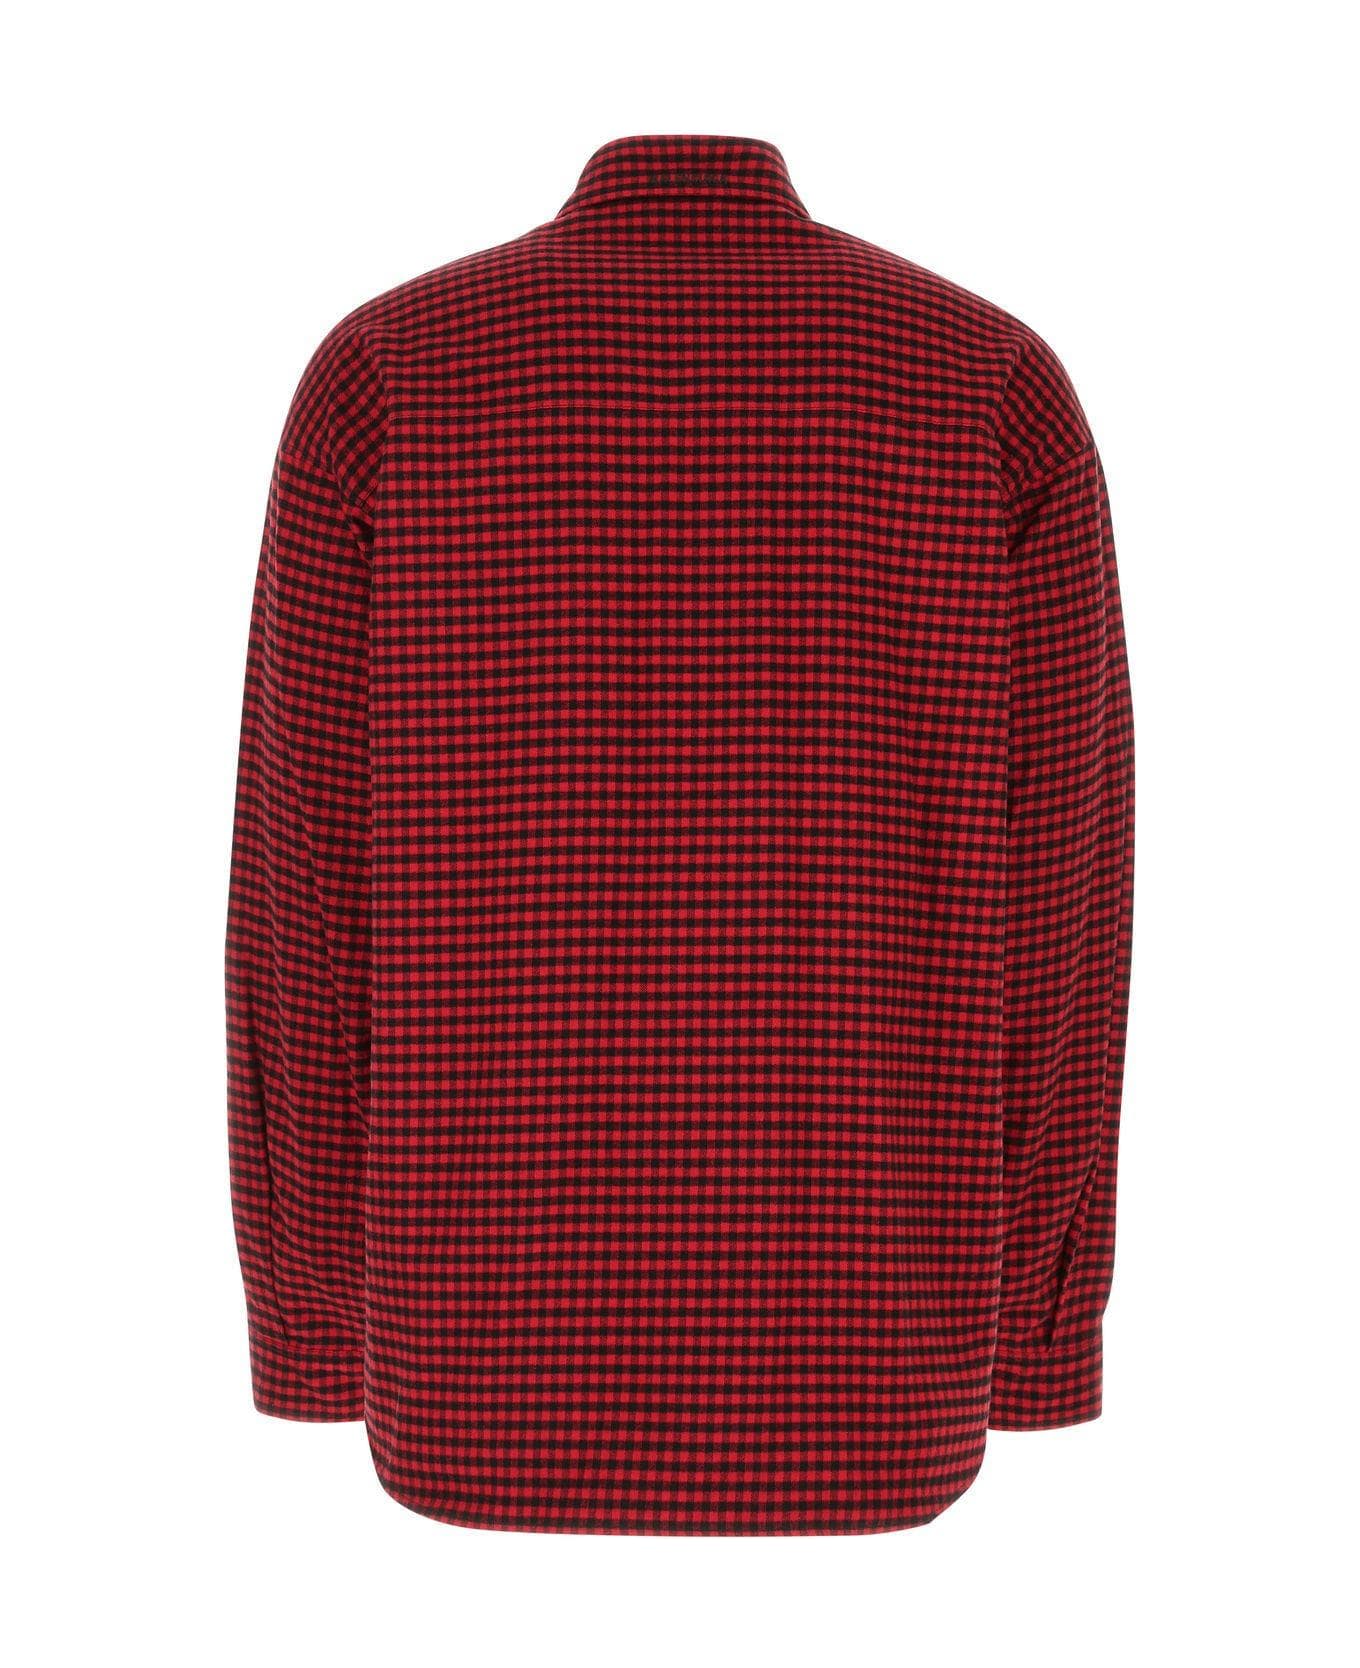 Balenciaga Embroidered Flanel Reversible Oversize Shirt - RED シャツ